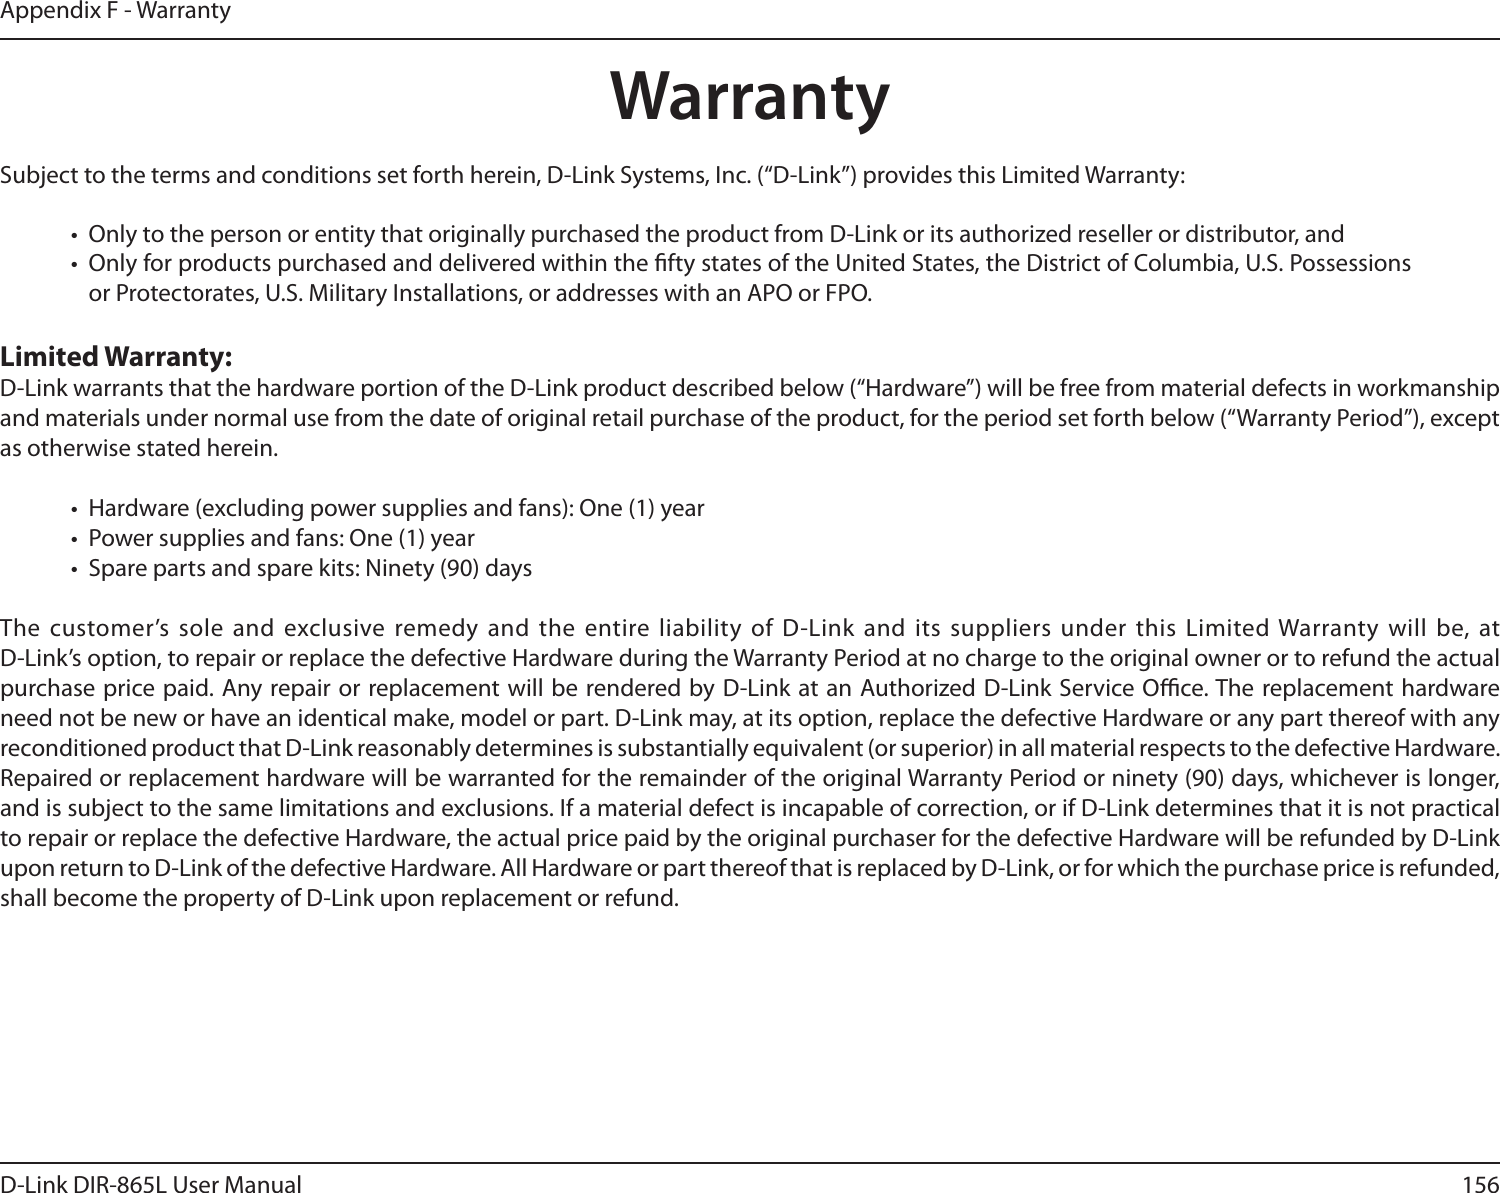 156D-Link DIR-865L User ManualAppendix F - WarrantyWarrantySubject to the terms and conditions set forth herein, D-Link Systems, Inc. (“D-Link”) provides this Limited Warranty:•  Only to the person or entity that originally purchased the product from D-Link or its authorized reseller or distributor, and•  Only for products purchased and delivered within the fty states of the United States, the District of Columbia, U.S. Possessions or Protectorates, U.S. Military Installations, or addresses with an APO or FPO.Limited Warranty:D-Link warrants that the hardware portion of the D-Link product described below (“Hardware”) will be free from material defects in workmanship and materials under normal use from the date of original retail purchase of the product, for the period set forth below (“Warranty Period”), except as otherwise stated herein.•  Hardware (excluding power supplies and fans): One (1) year•  Power supplies and fans: One (1) year•  Spare parts and spare kits: Ninety (90) daysThe customer’s sole  and exclusive remedy and  the entire liability of D-Link  and its  suppliers under this  Limited Warranty will  be, at  D-Link’s option, to repair or replace the defective Hardware during the Warranty Period at no charge to the original owner or to refund the actual purchase price paid. Any repair or replacement will be rendered by D-Link at an Authorized D-Link Service Oce. The replacement hardware need not be new or have an identical make, model or part. D-Link may, at its option, replace the defective Hardware or any part thereof with any reconditioned product that D-Link reasonably determines is substantially equivalent (or superior) in all material respects to the defective Hardware. Repaired or replacement hardware will be warranted for the remainder of the original Warranty Period or ninety (90) days, whichever is longer, and is subject to the same limitations and exclusions. If a material defect is incapable of correction, or if D-Link determines that it is not practical to repair or replace the defective Hardware, the actual price paid by the original purchaser for the defective Hardware will be refunded by D-Link upon return to D-Link of the defective Hardware. All Hardware or part thereof that is replaced by D-Link, or for which the purchase price is refunded, shall become the property of D-Link upon replacement or refund.